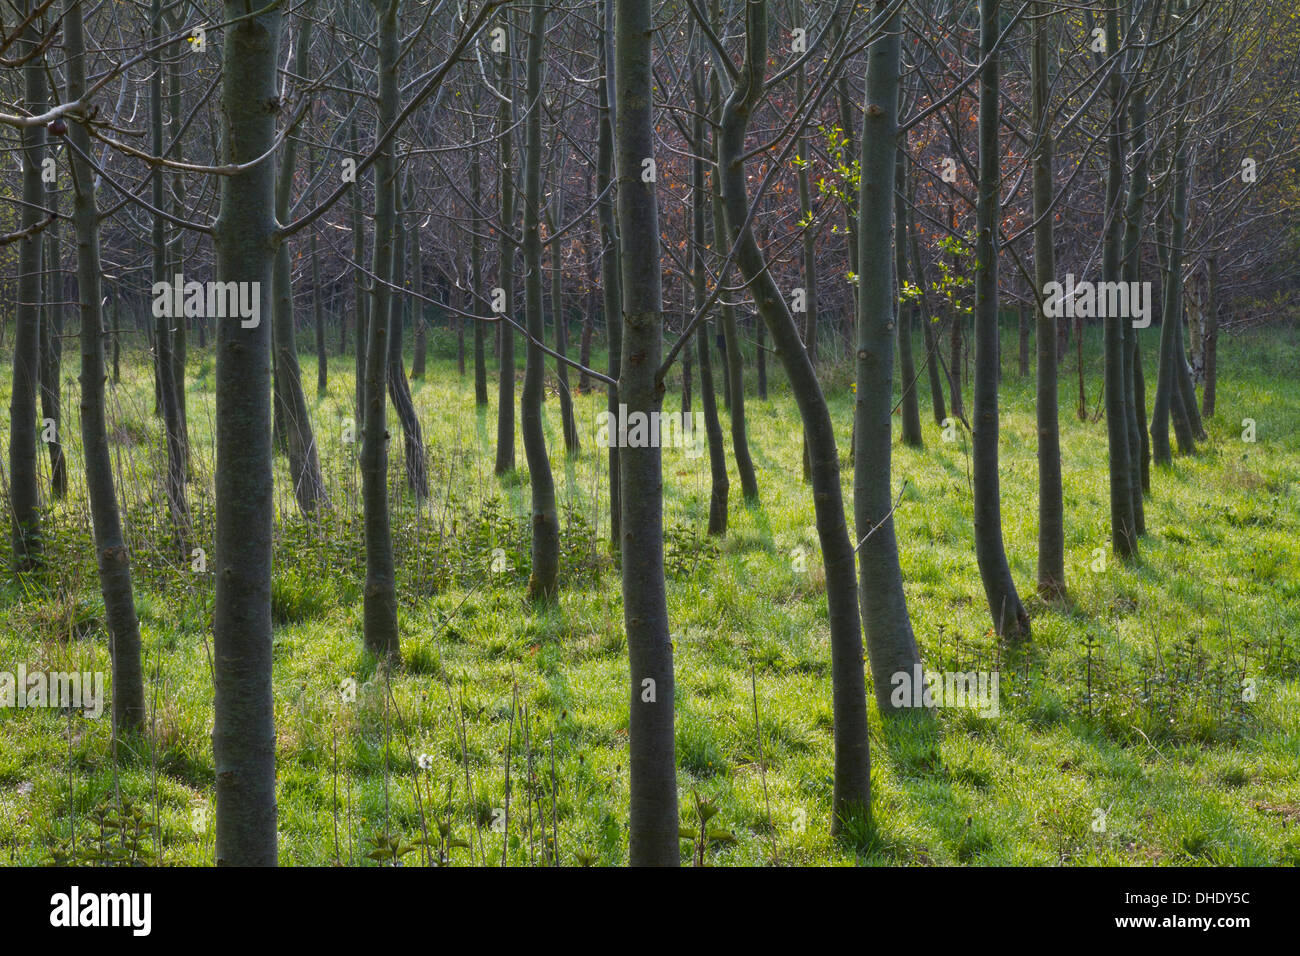 A healthy Common Ash tree plantation fraxinus excelsior Stock Photo